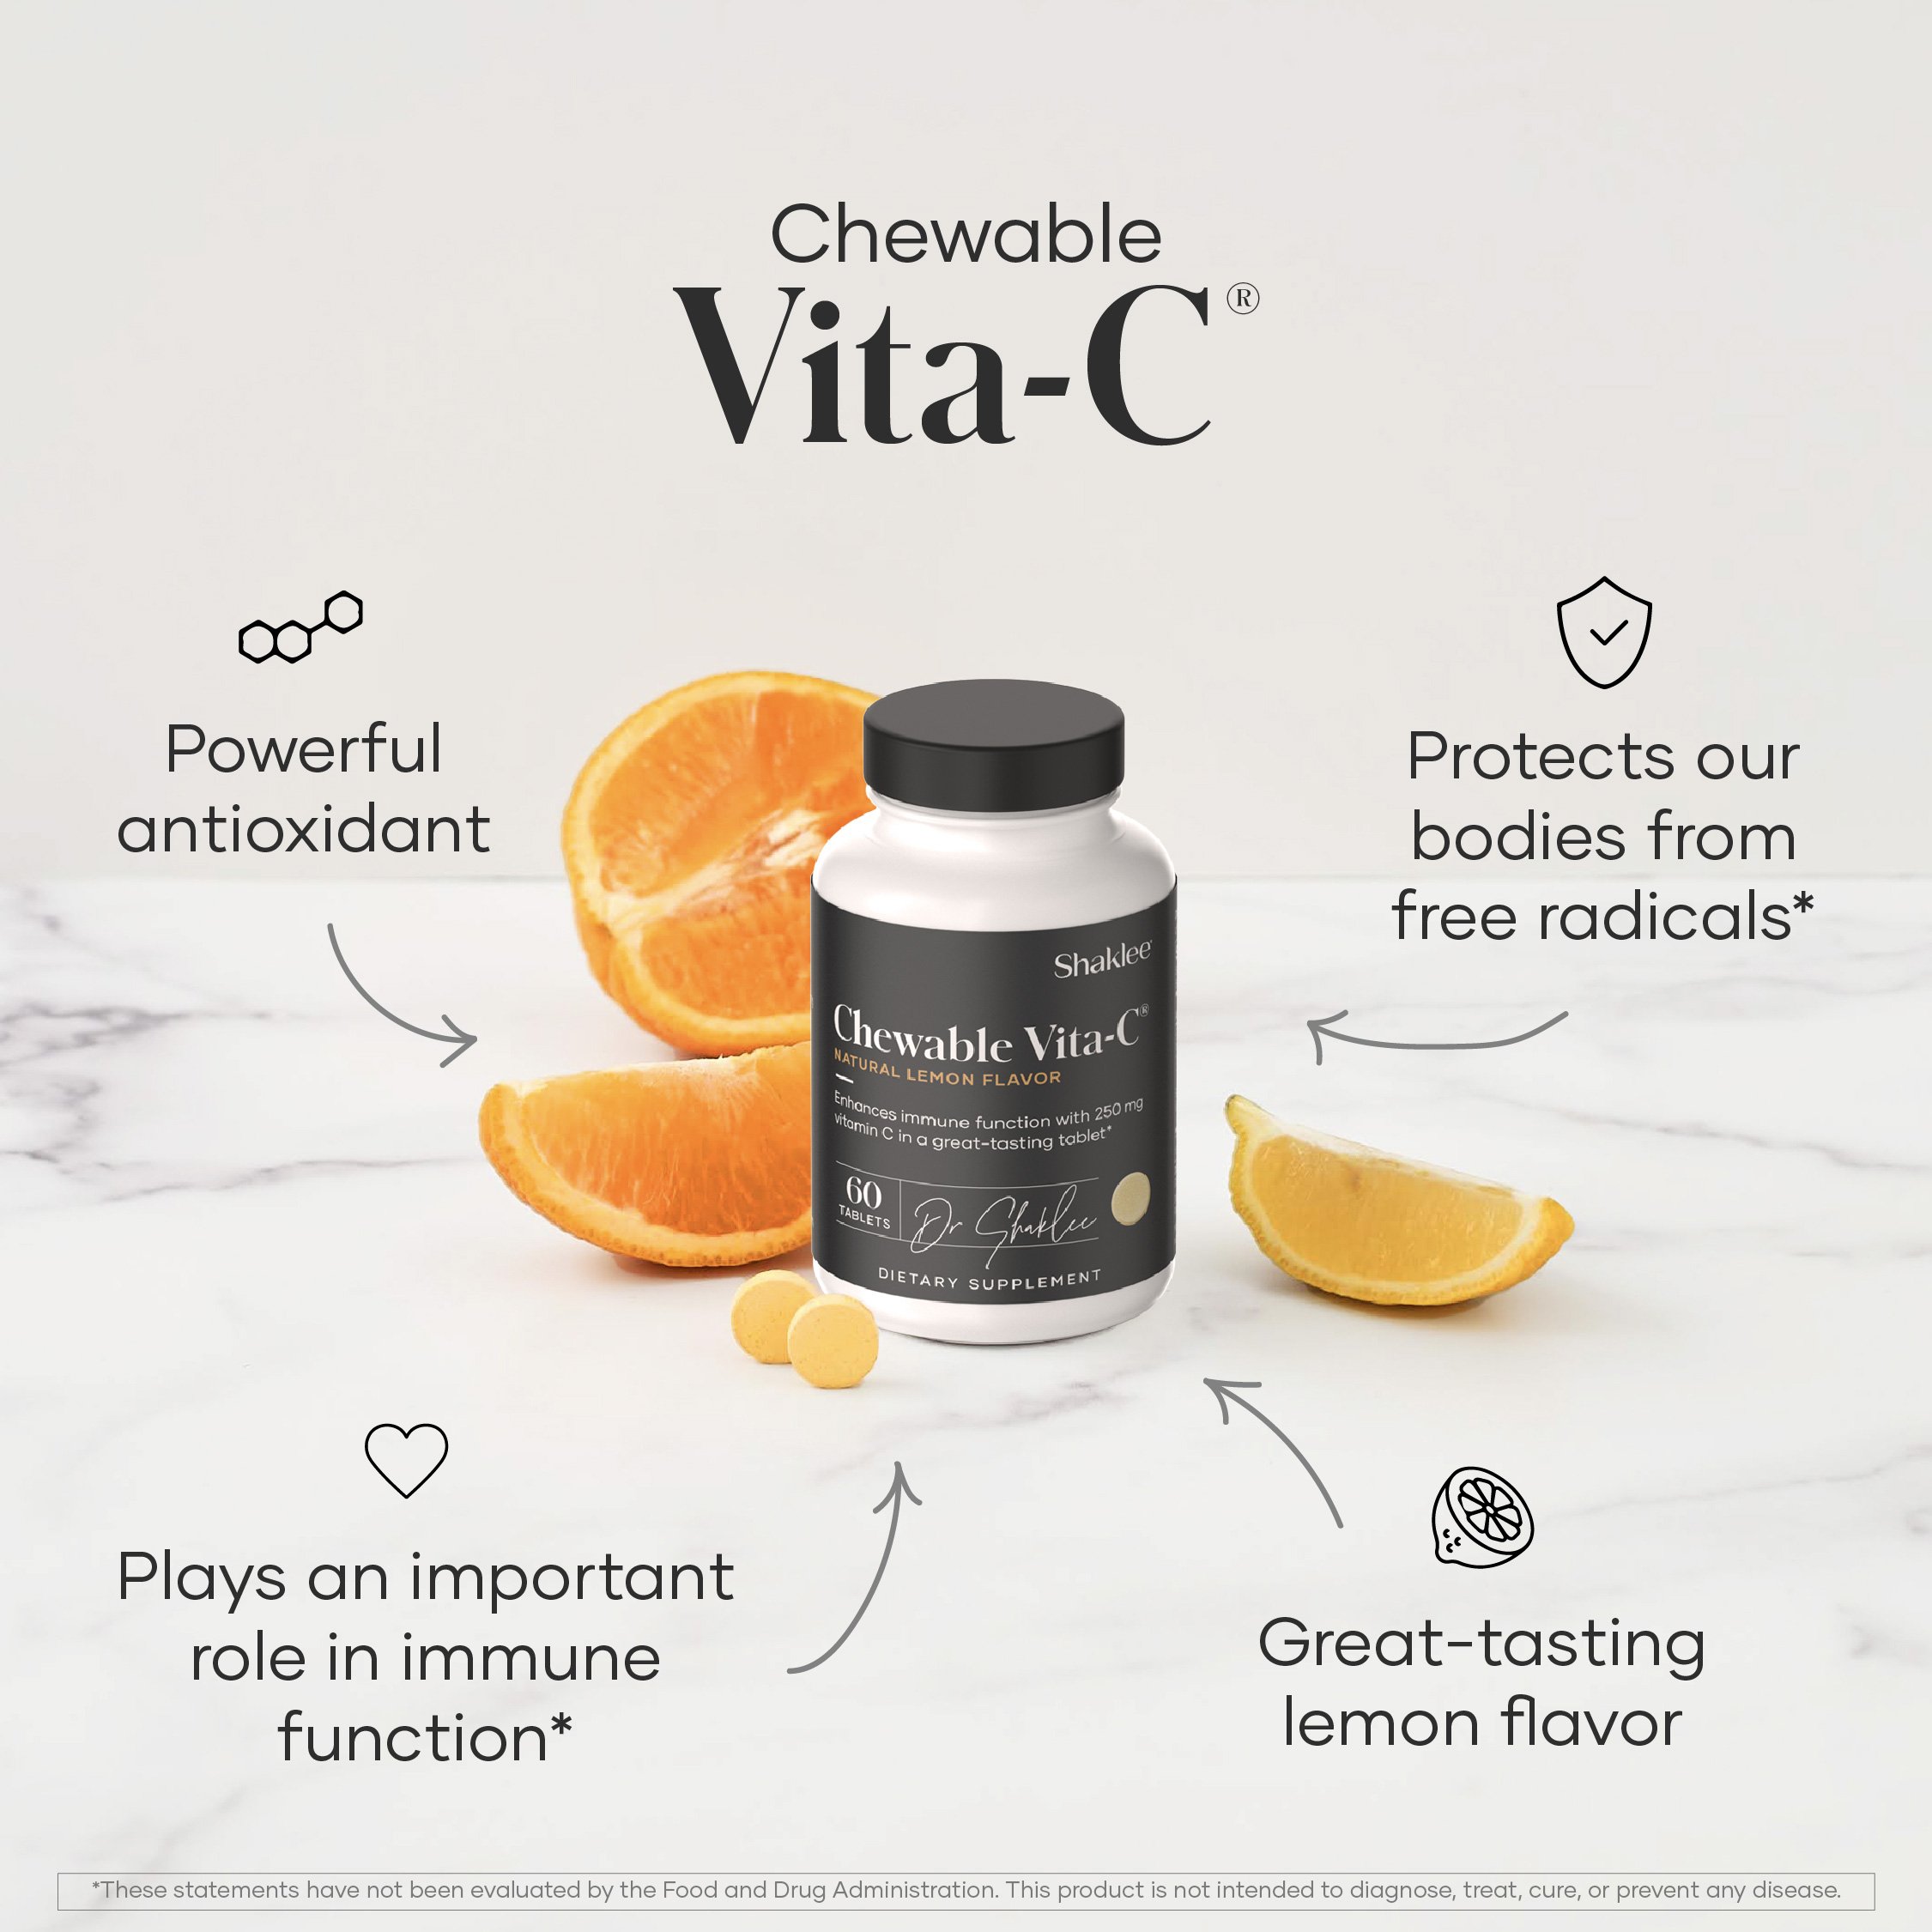 Chewable Vita-C Info Graphic Feed with Bottle and Oranges.jpg